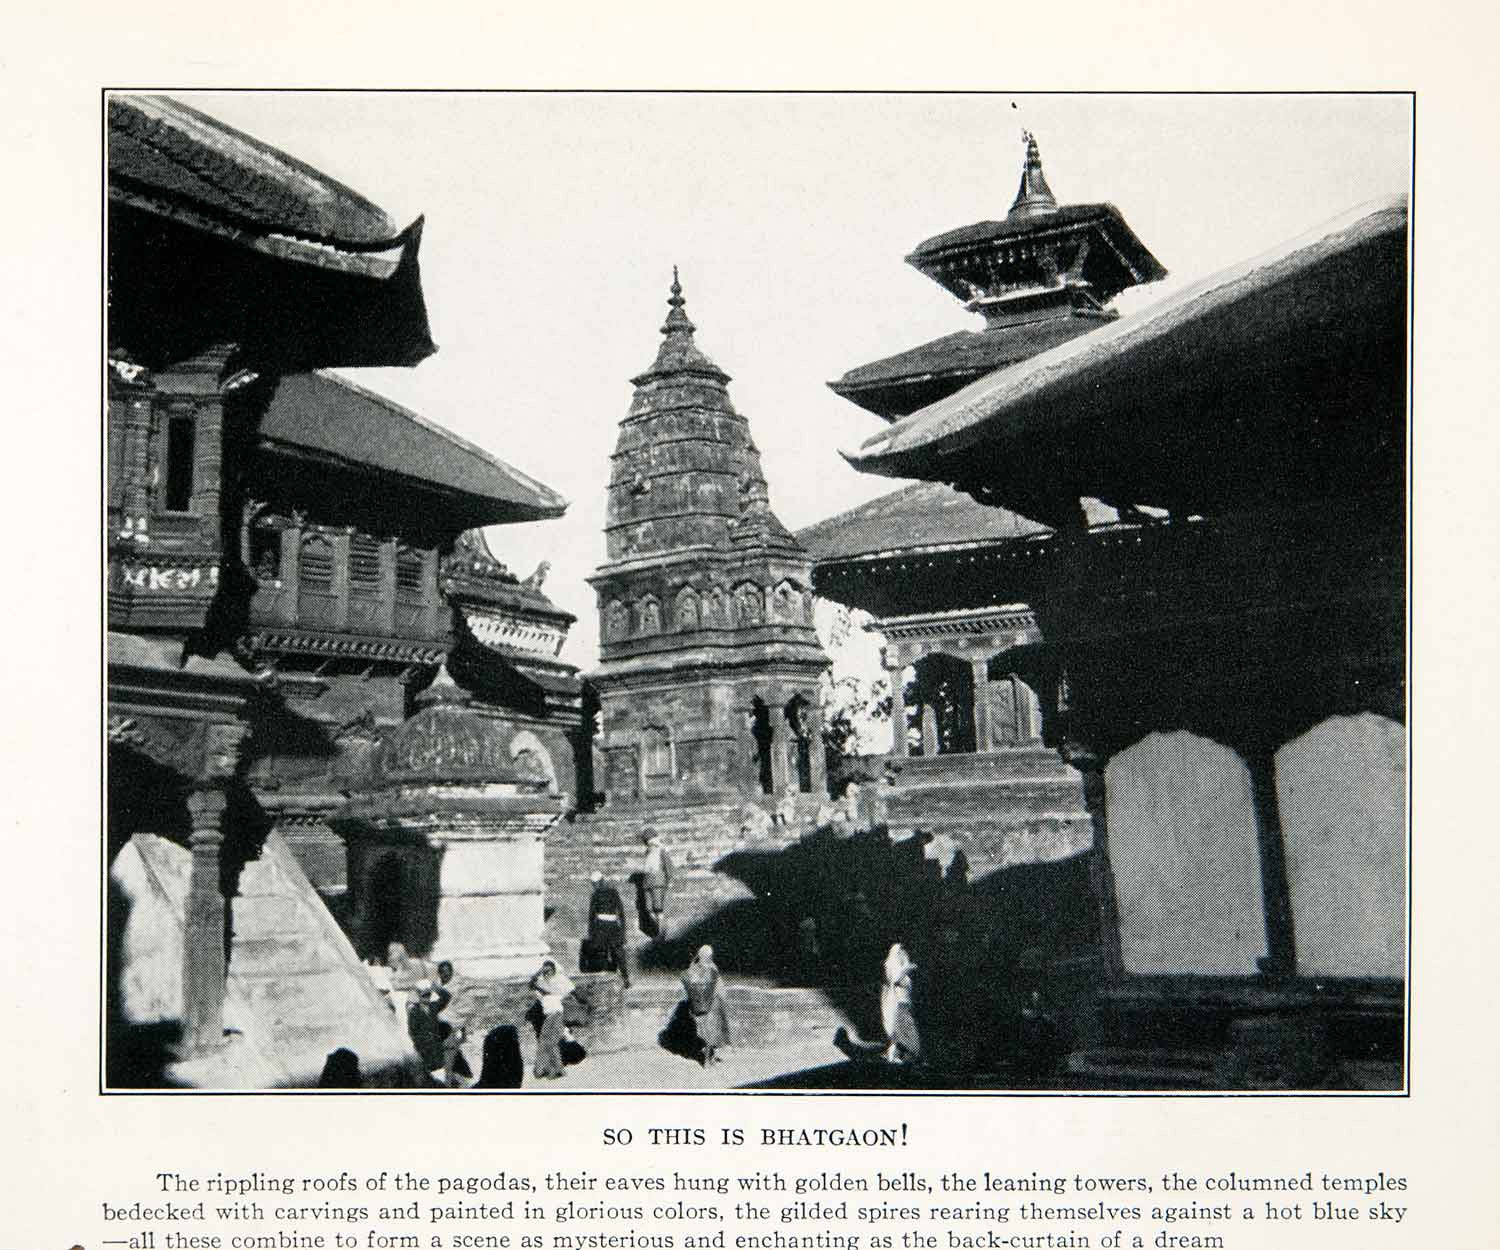 1929 Print Bhatgaon Nepal Architecture Bell Pagoda Temple Tower Carving XGFB7